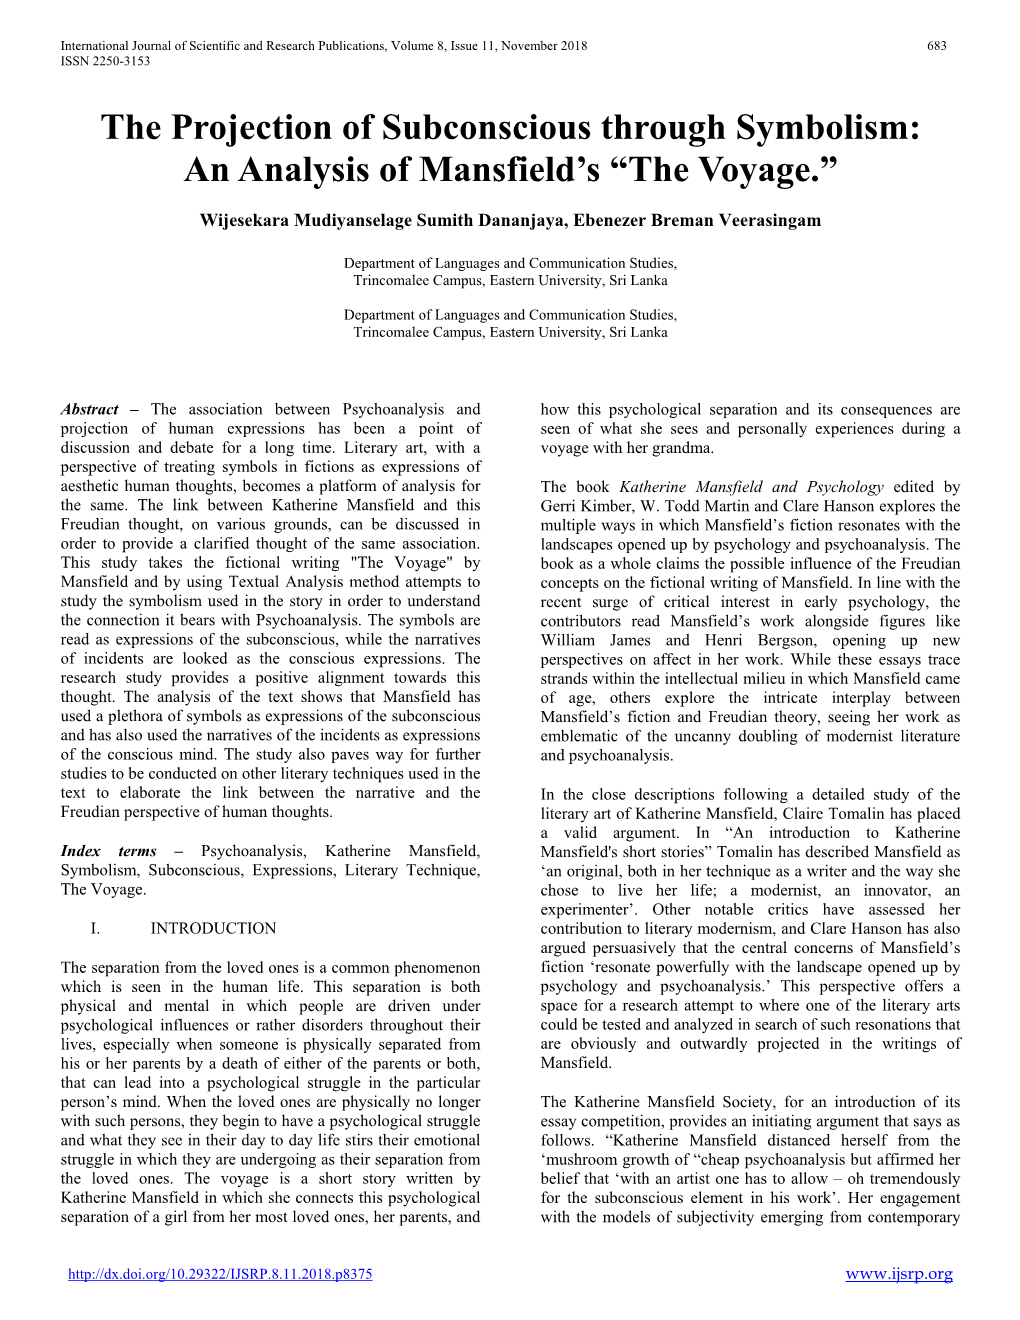 An Analysis of Mansfield's “The Voyage.”